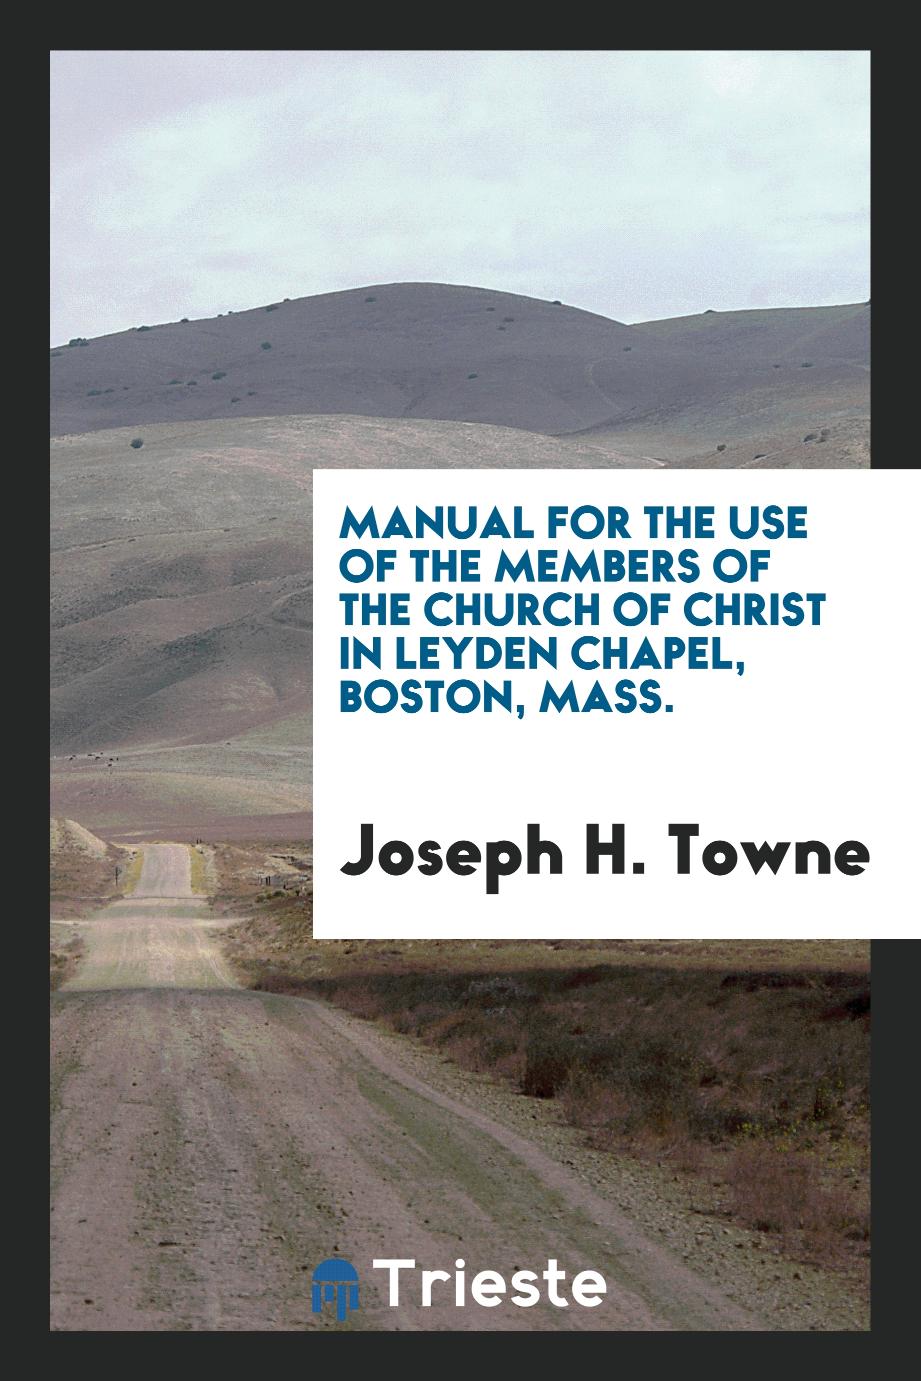 Manual for the Use of the Members of the Church of Christ in Leyden Chapel, Boston, Mass.